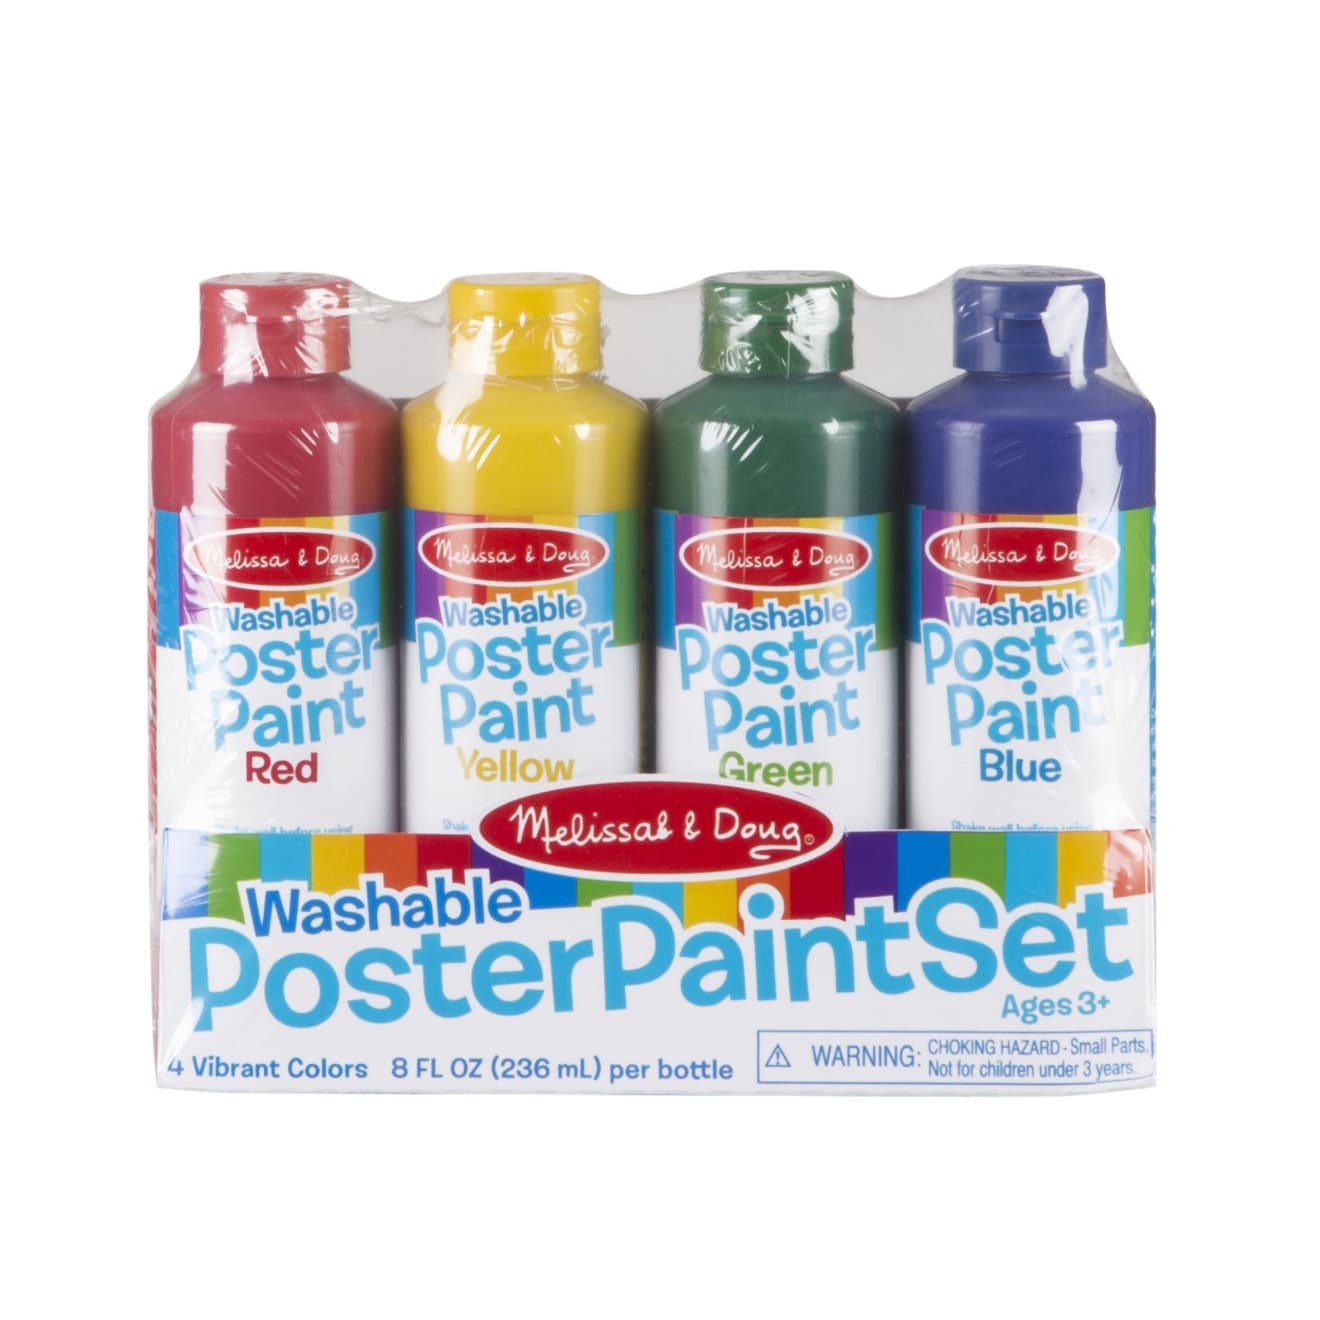 https://cdn.shopify.com/s/files/1/0550/8487/5830/products/Poster-Paint-Set-of-4-004127-1-Packaging-Photo.jpg?v=1670014479